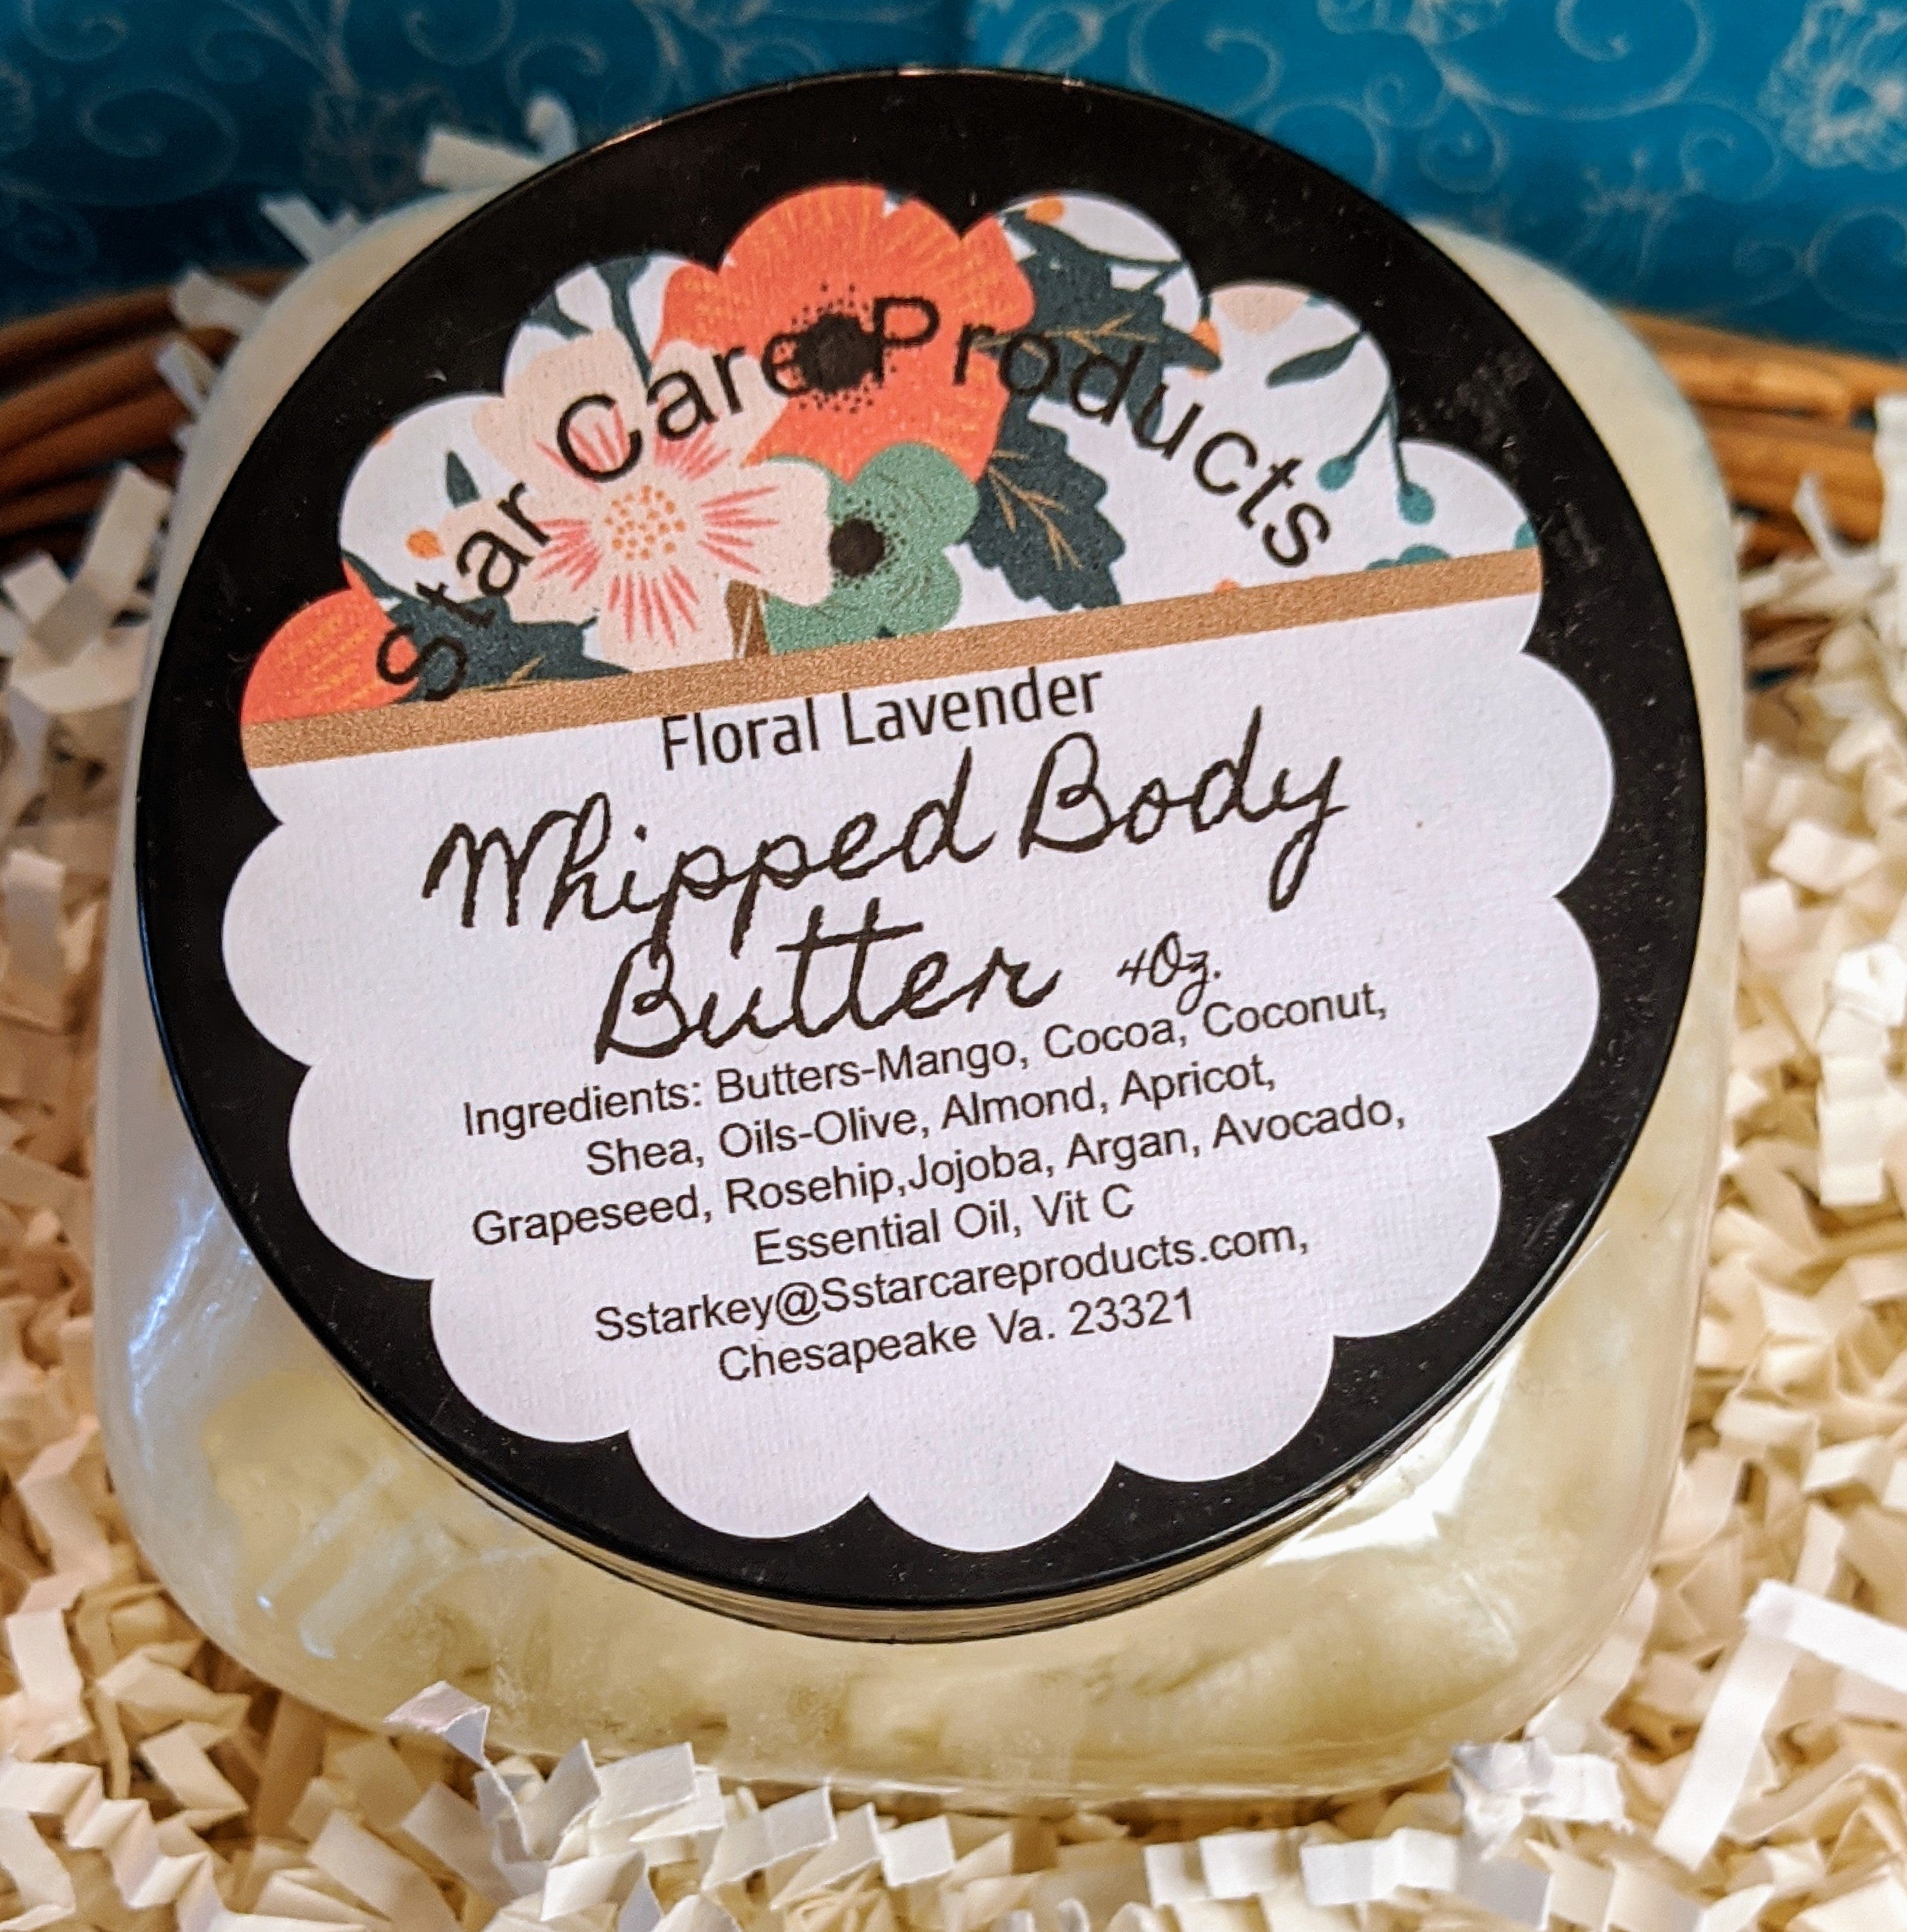 Cheer Up Buttercup - Whipped Body Butter | Yolanda Rountree